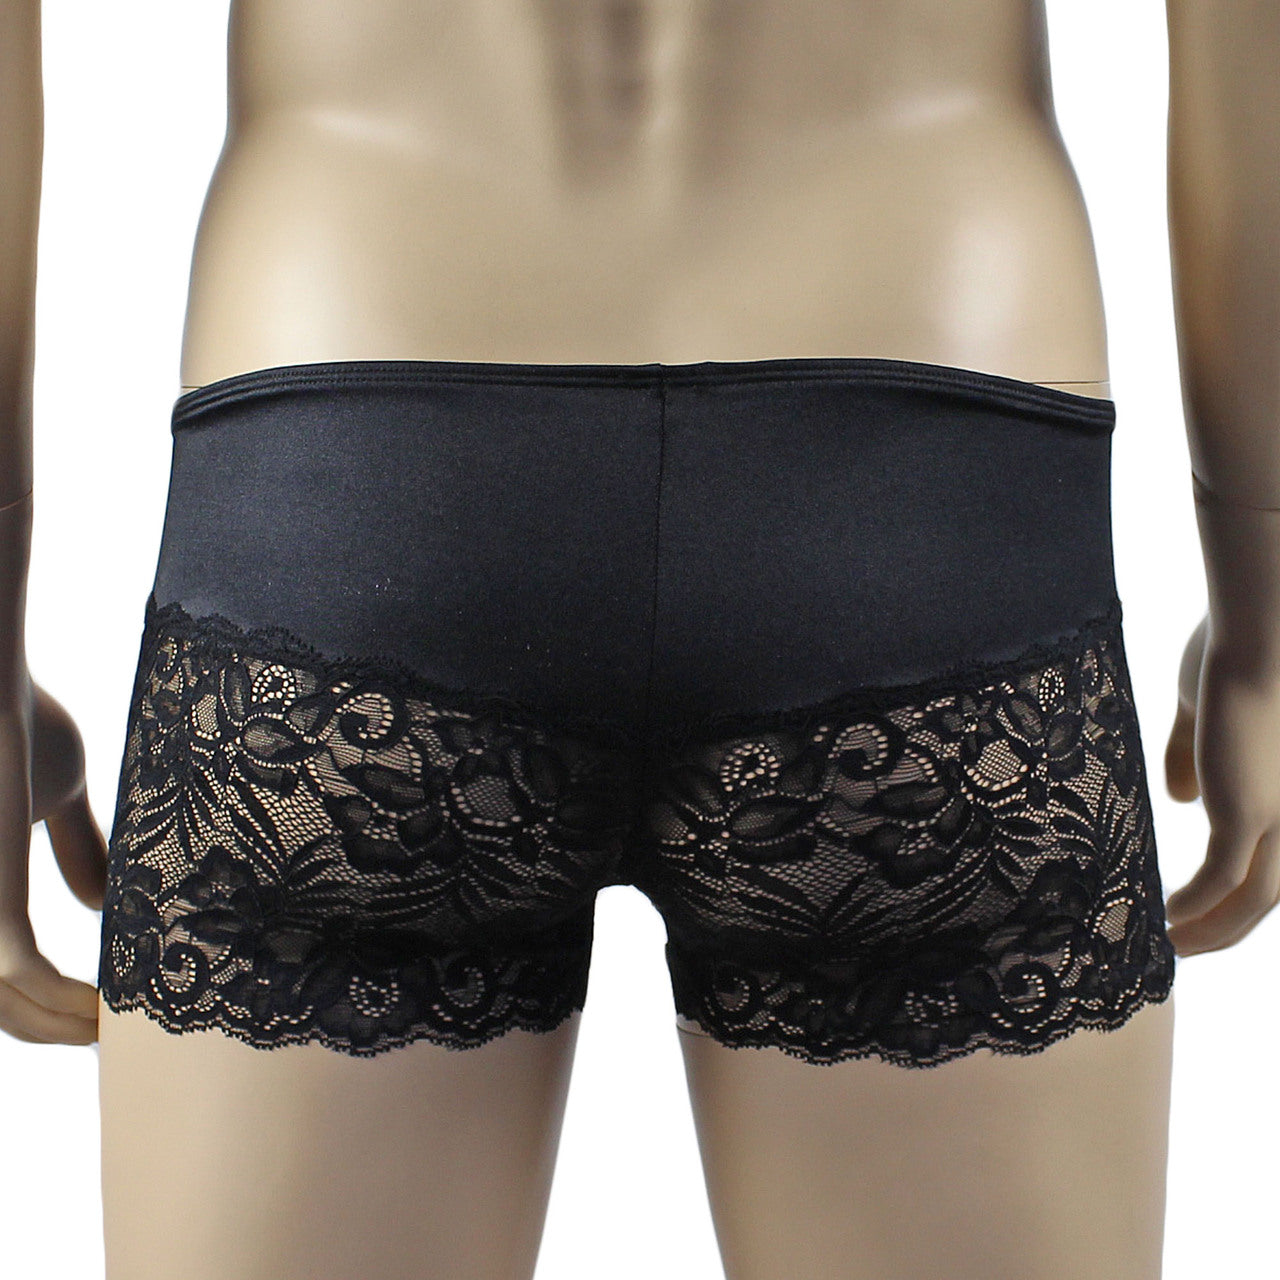 Mens Risque Boxer Briefs with Detachable Garters & Stockings Black and Black Lace